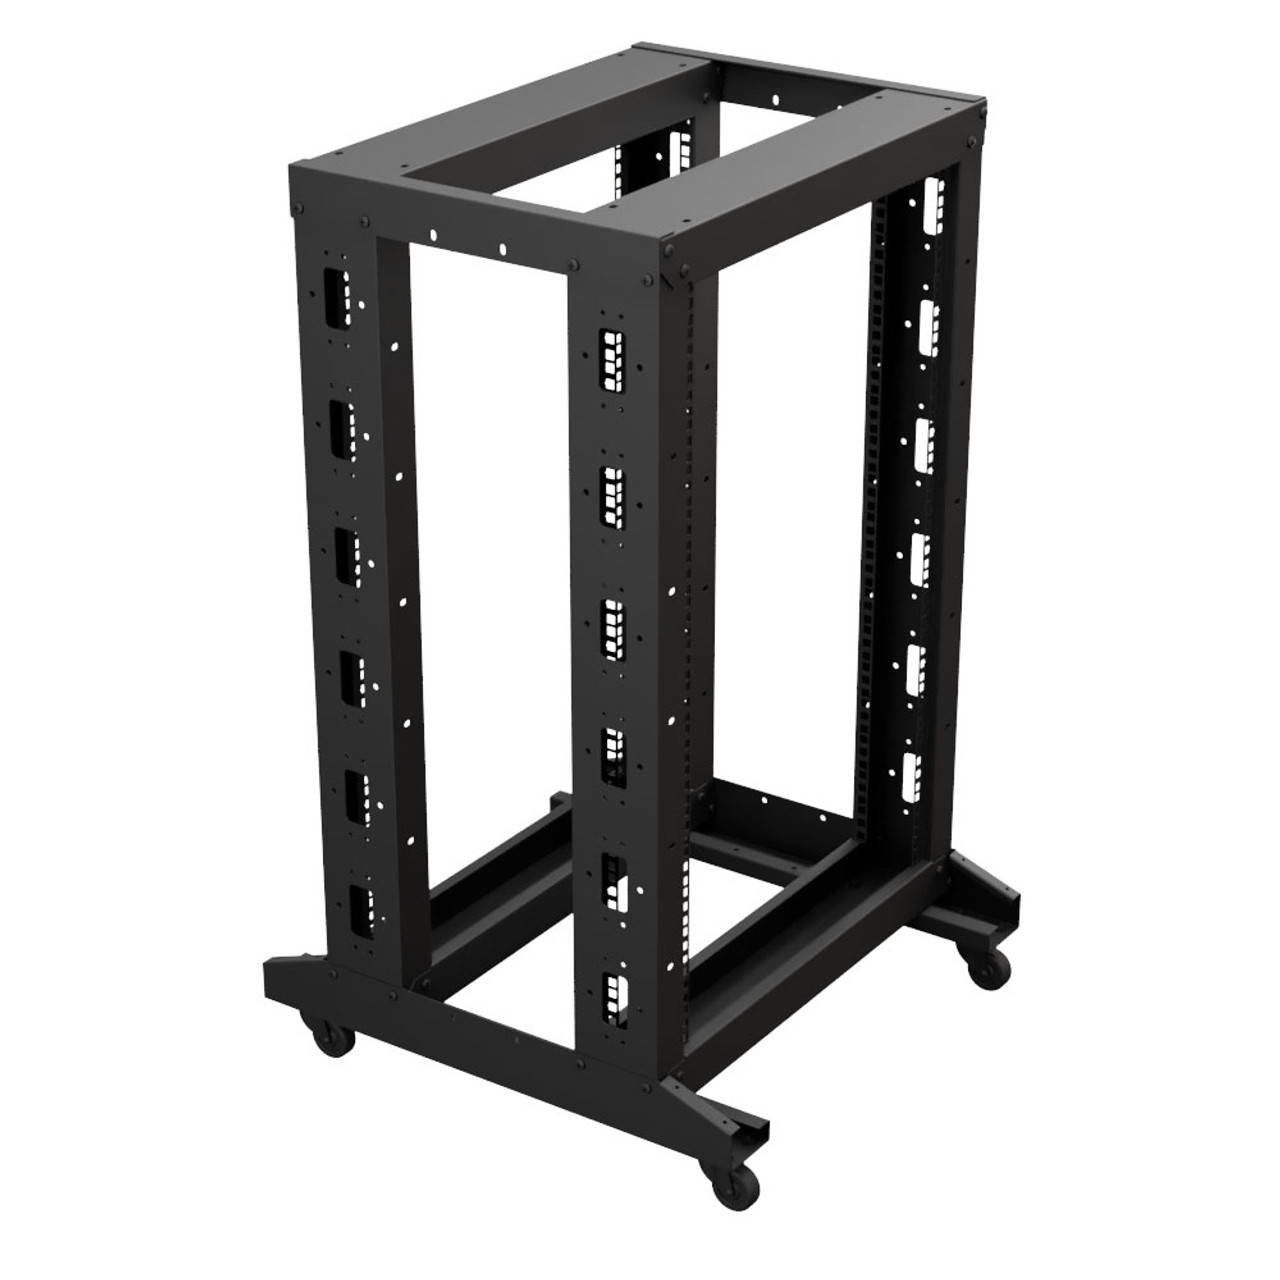 NavePoint 4-Post Adjustable Rack, 18U, Cage Nuts, Includes Casters ...